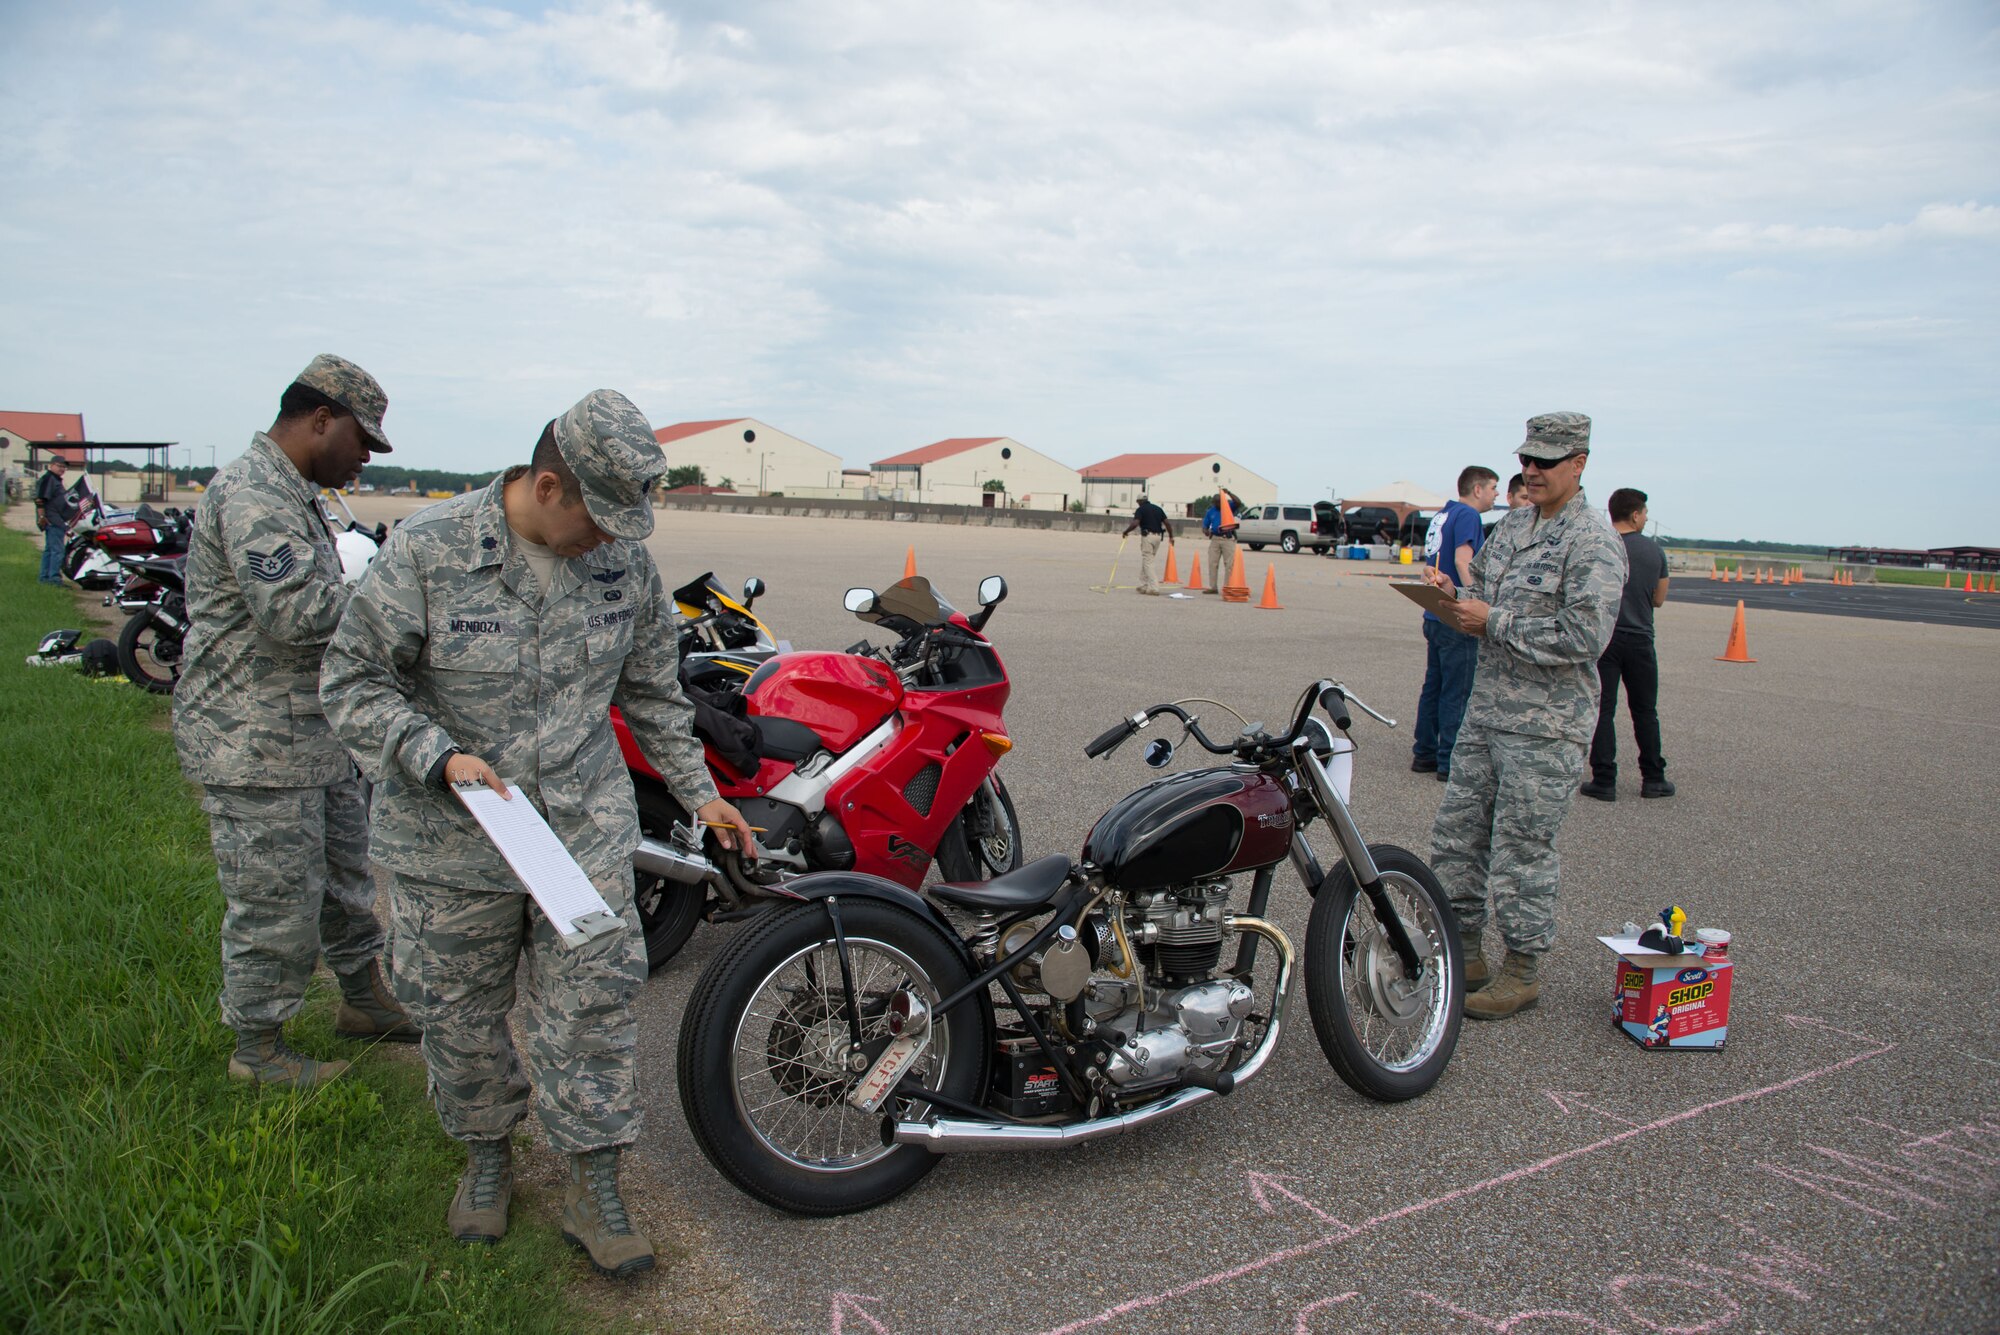 Col. Eric Shafa, 42nd Air Base Wing commander, and Lt. Col. Daniel Mendoza, 42nd ABW chief of safety, judge motorcycles during Motorcycle Safety Day, on Maxwell Air Force Base, Ala., June 27, 2017. The motorcycle show was one of four categories motorcyclists could enter during the safety day. (US Air Force photo/Trey Ward/Released)